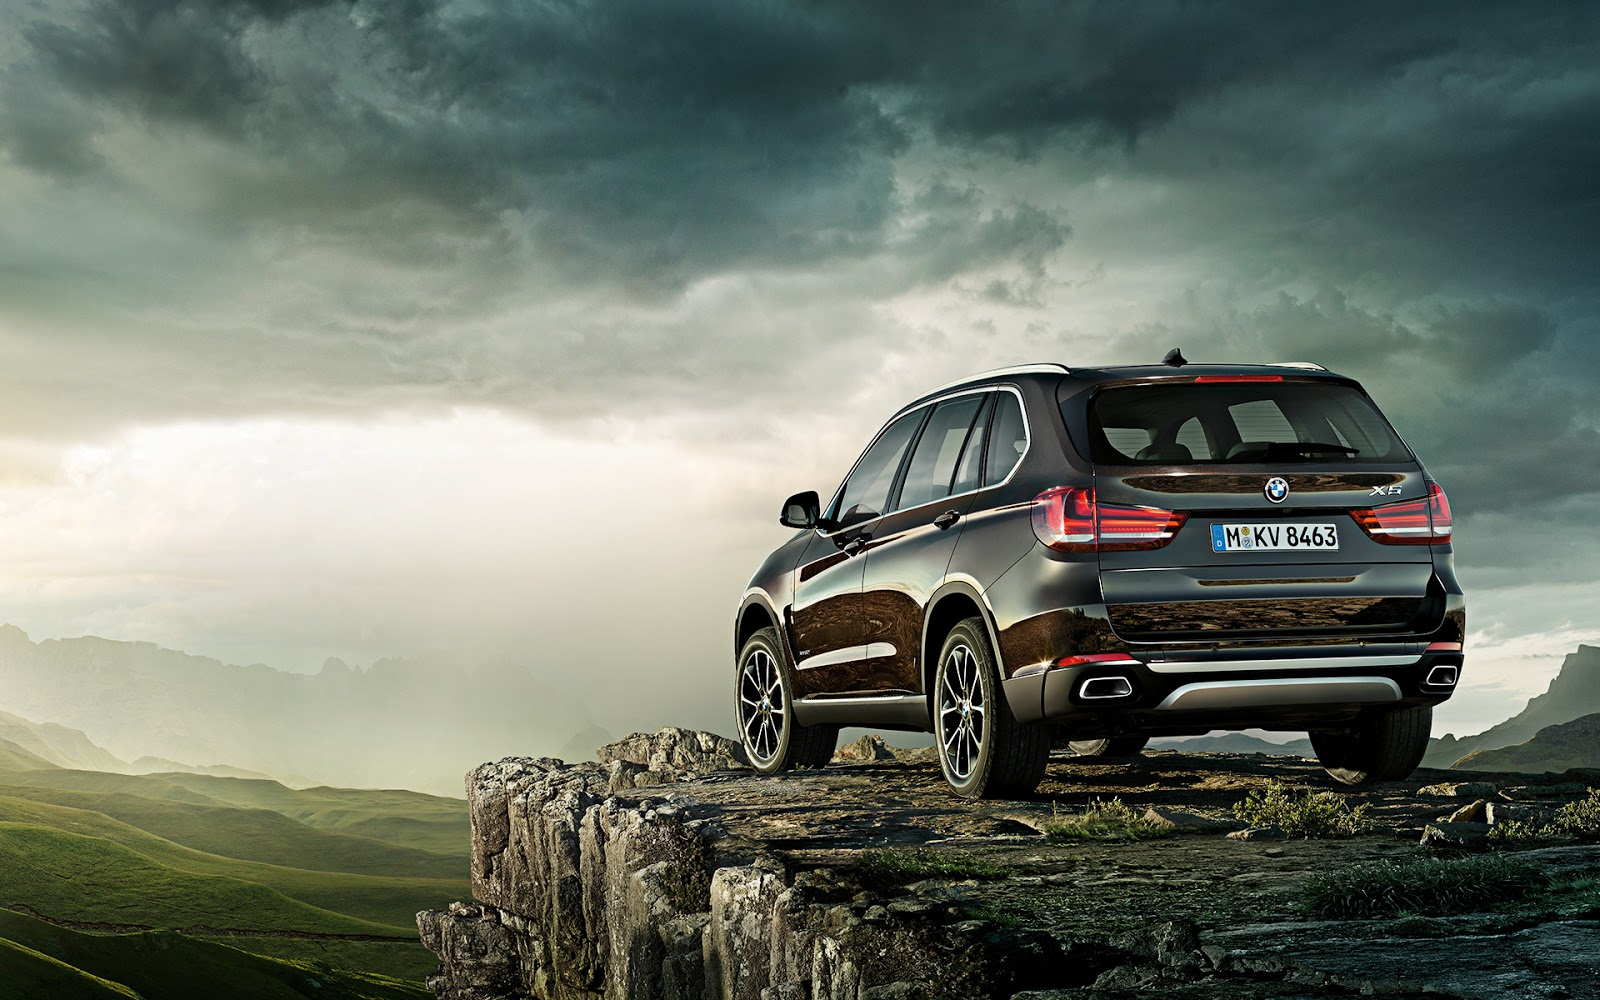 2014 Bmw X5 M50D Wallpapers